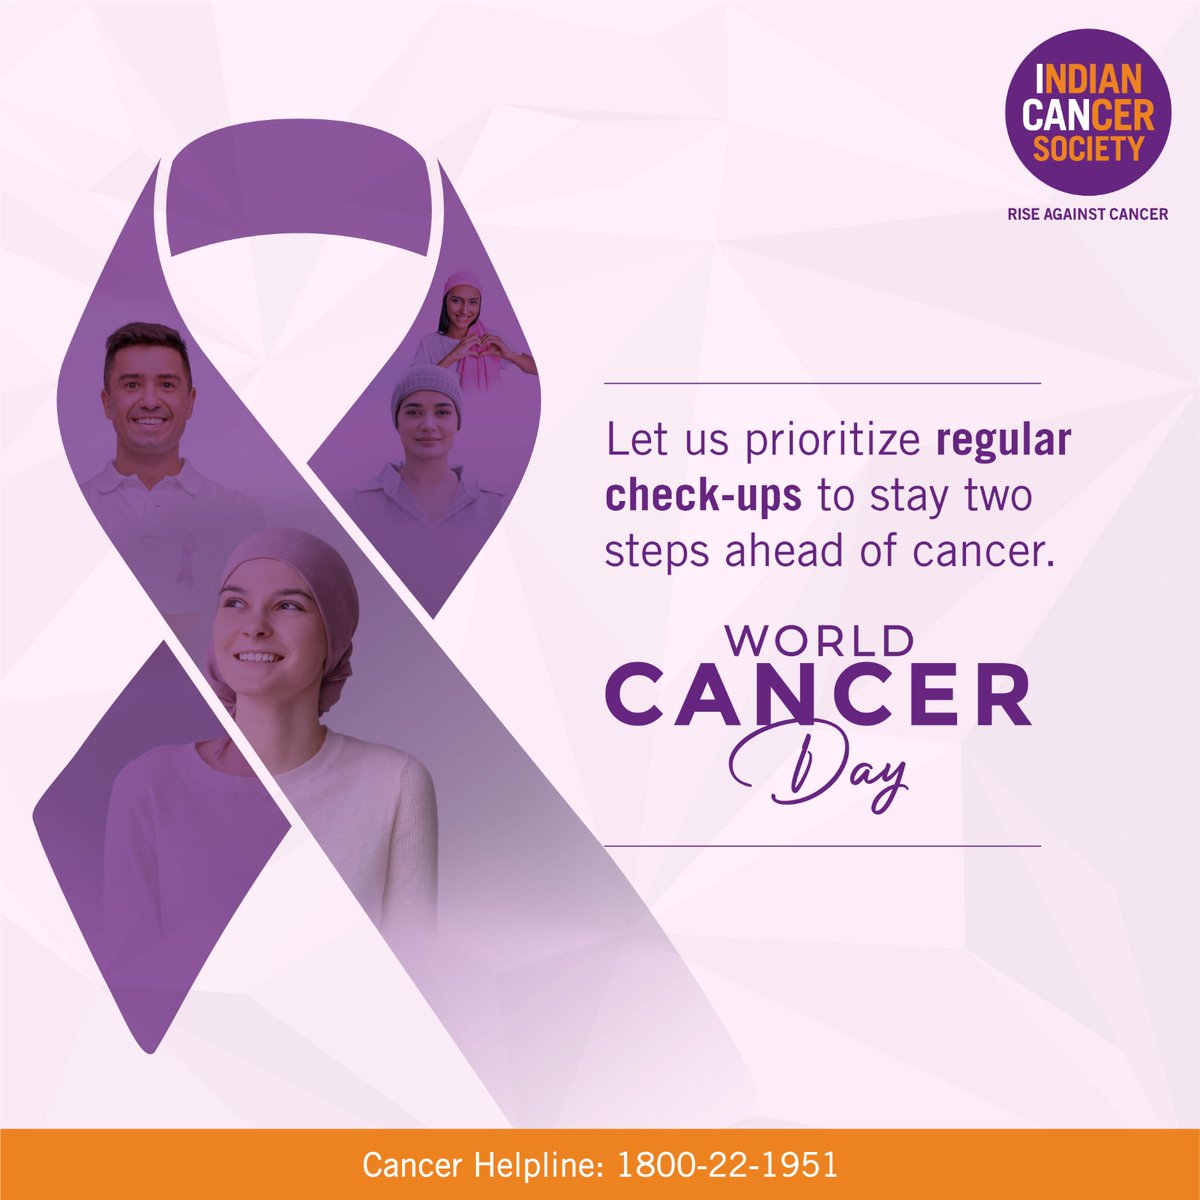 Cancer awareness starts with you, therefore empower yourself with knowledge to stay 2 steps ahead of cancer. For more details visit our website: indiancancersociety.org